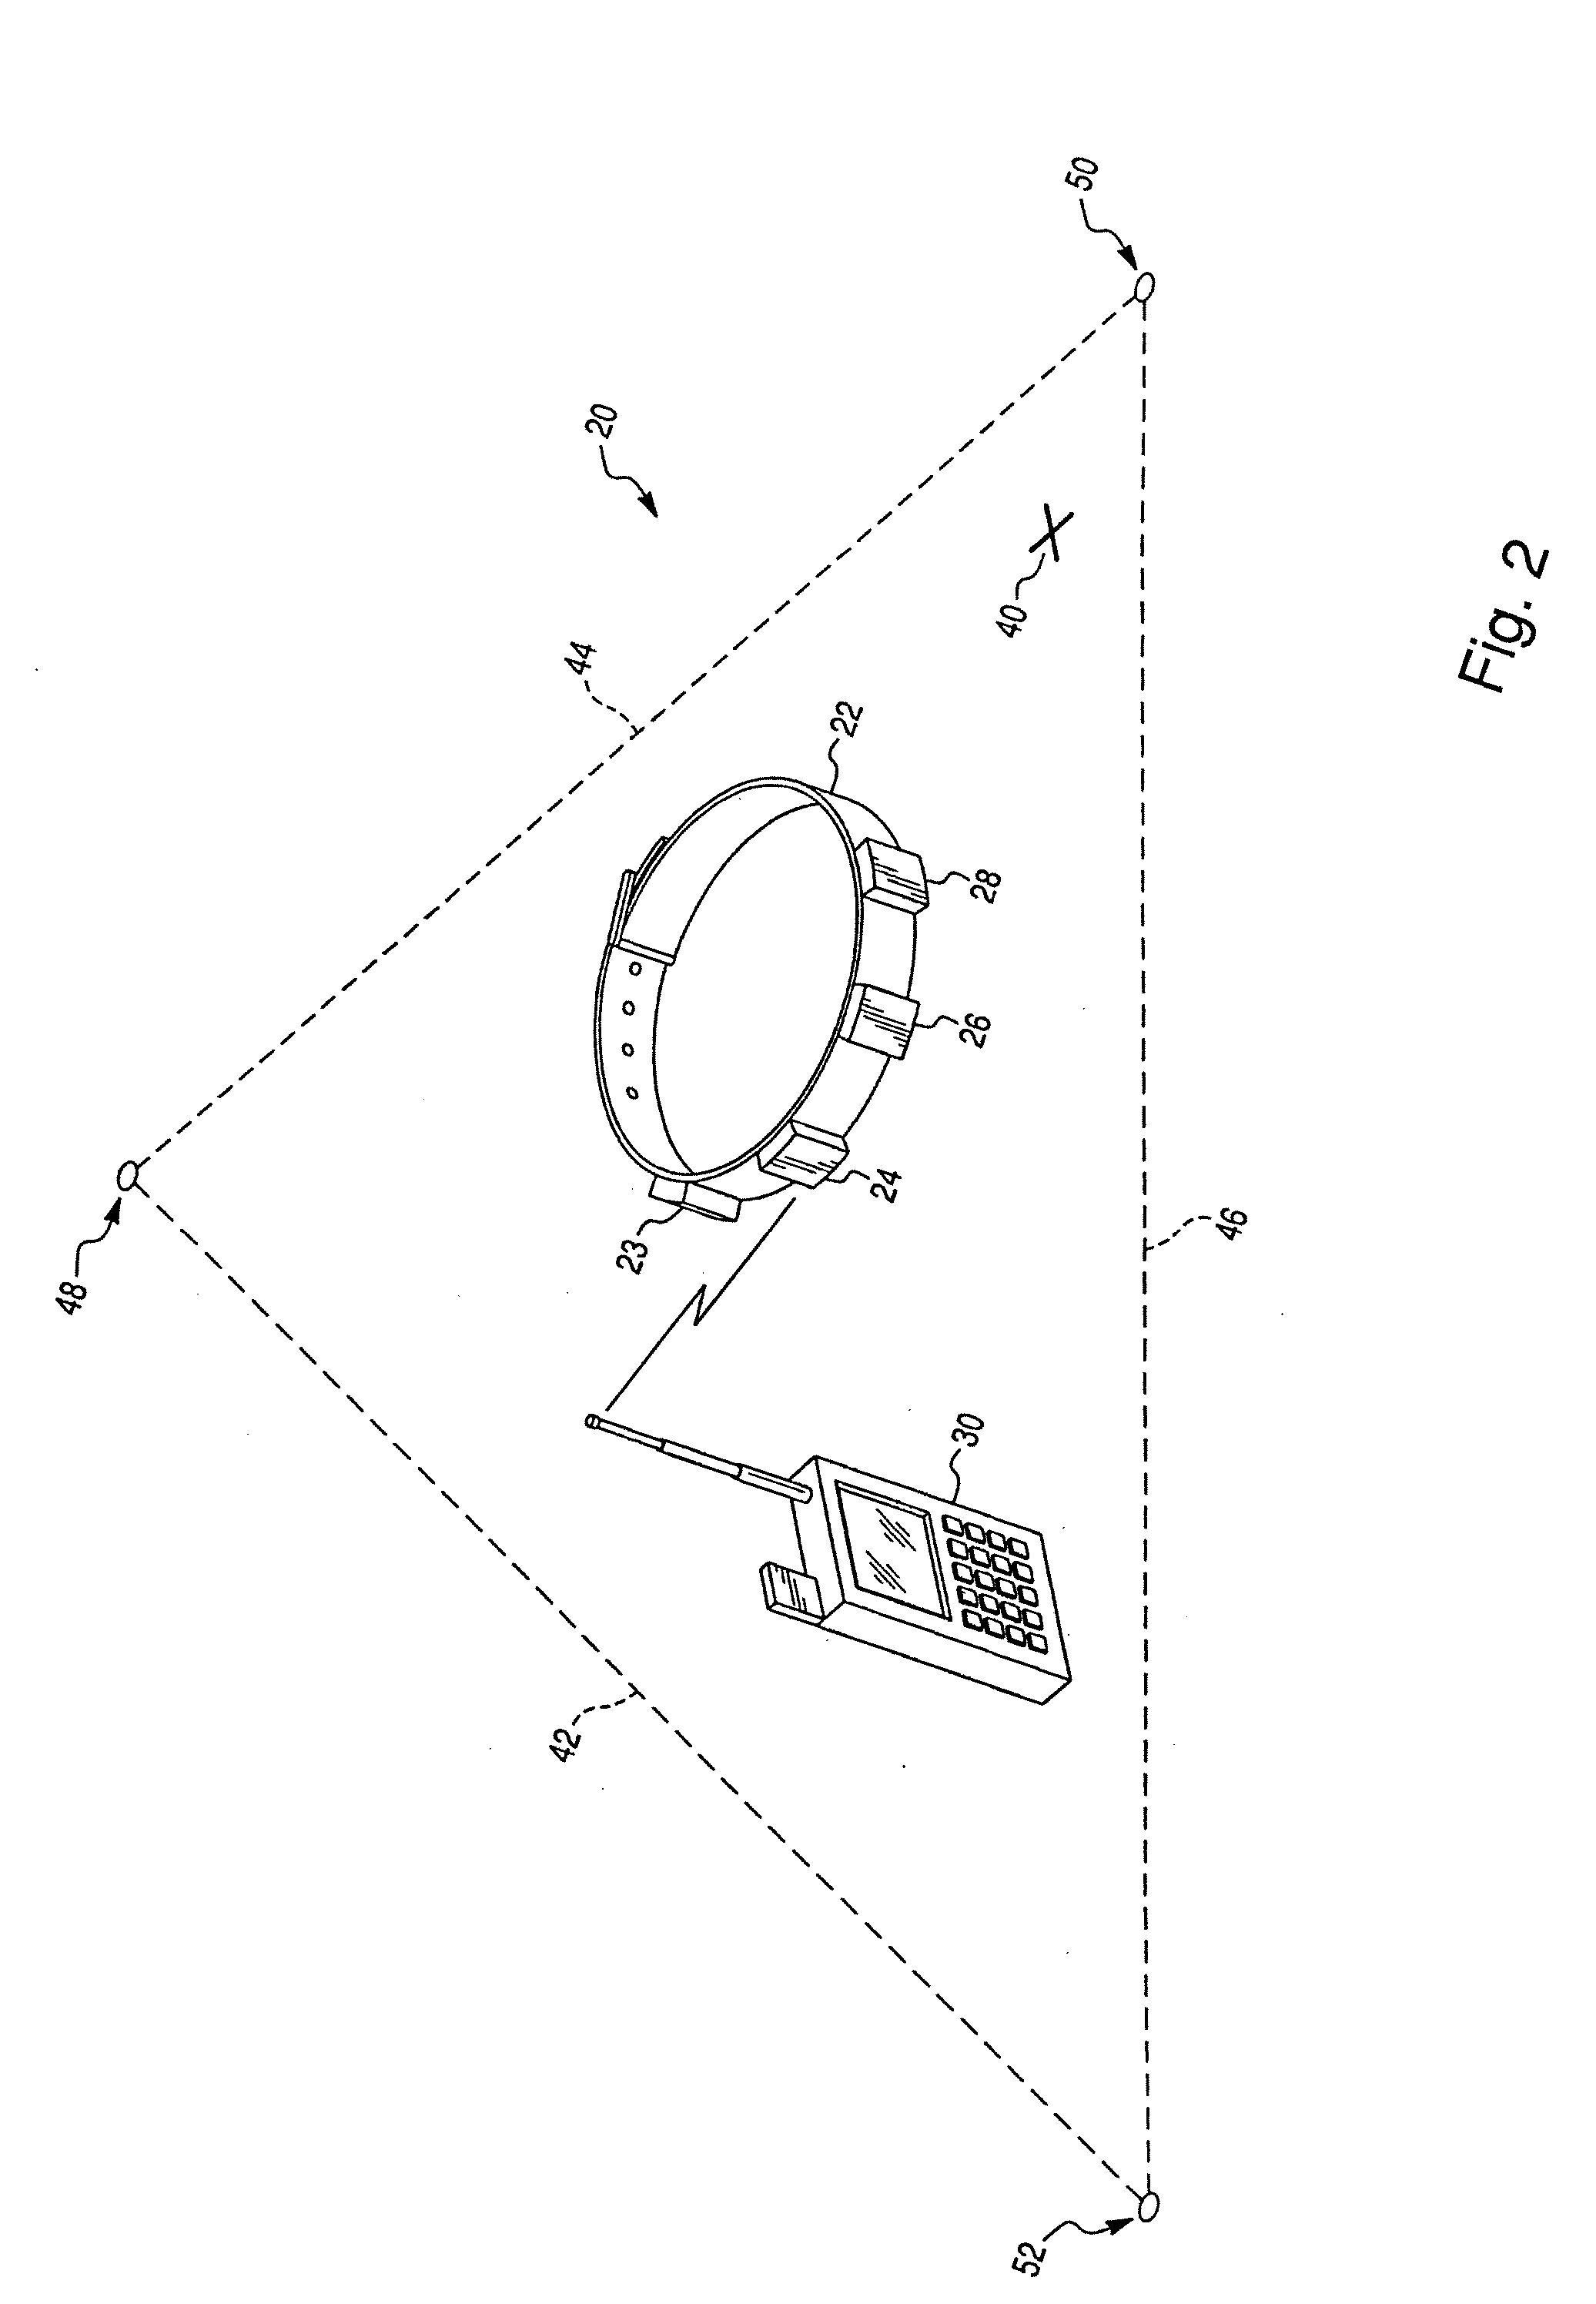 Method and appartus for training and for constraining a subject to a specific area